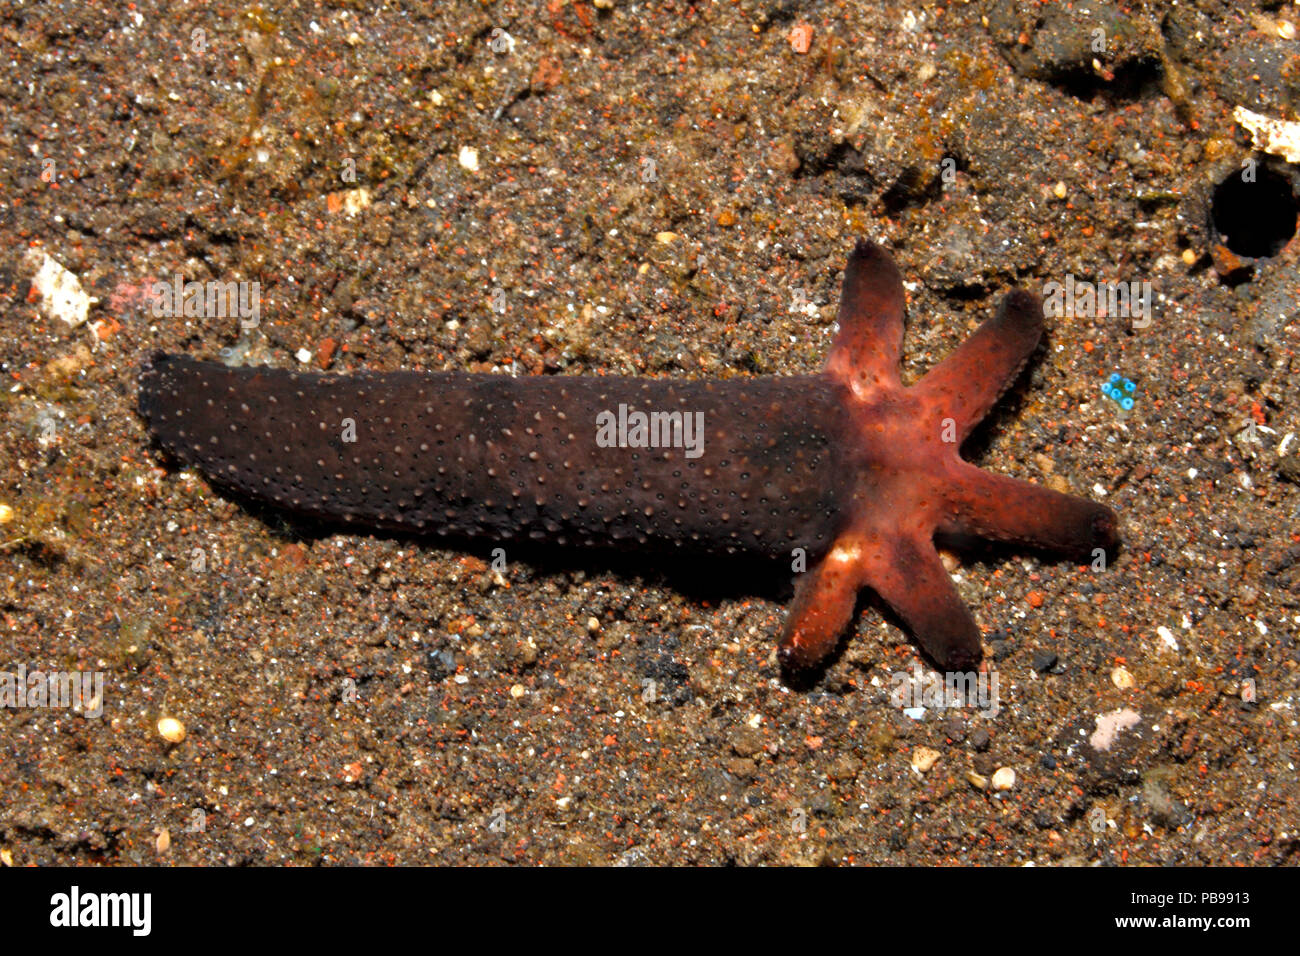 Luzon Sea Star, Echinaster luzonicus, showing a five arm regeneration growing from the stump of a 'parent' arm. Please see below for more information. Stock Photo